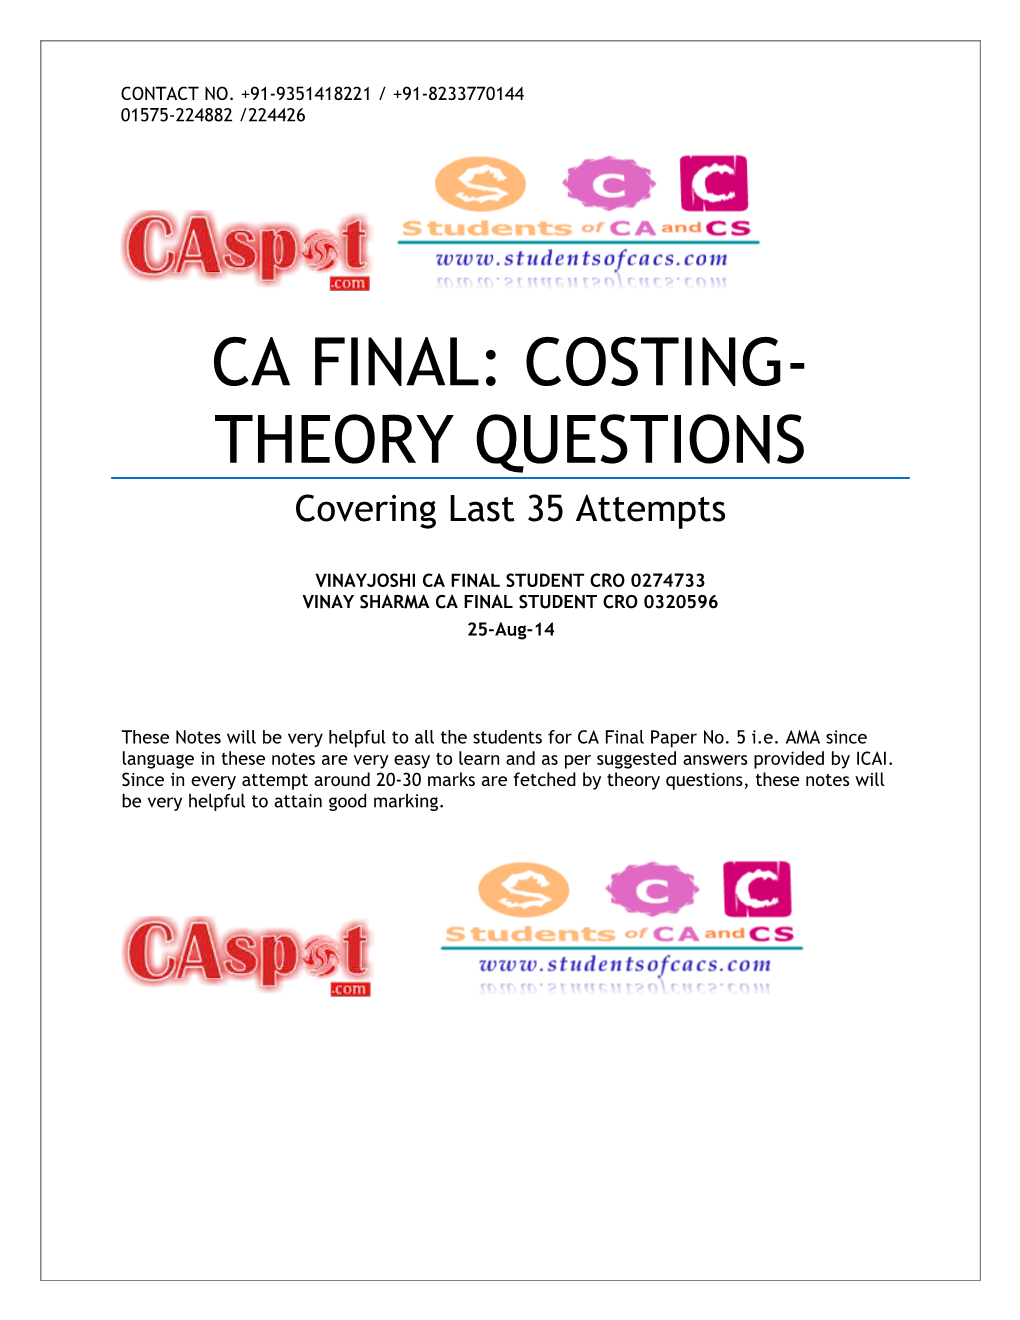 Ca Final: Costing-Theory Questions